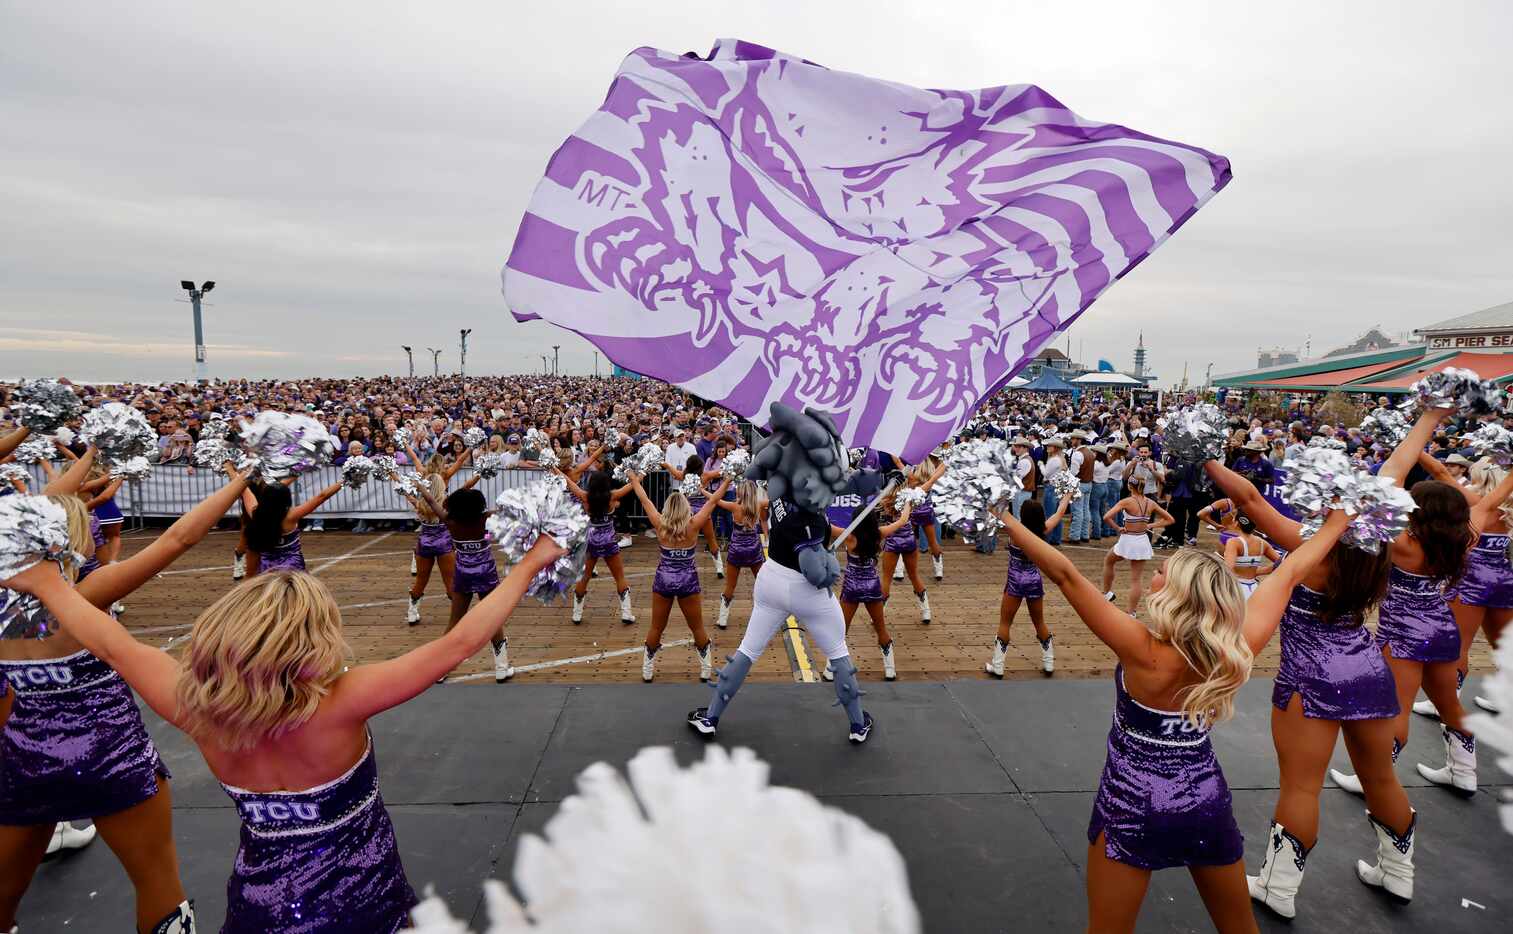 Ahead of the CFP National Championship football game, the TCU Horned Frogs mascot, Super...